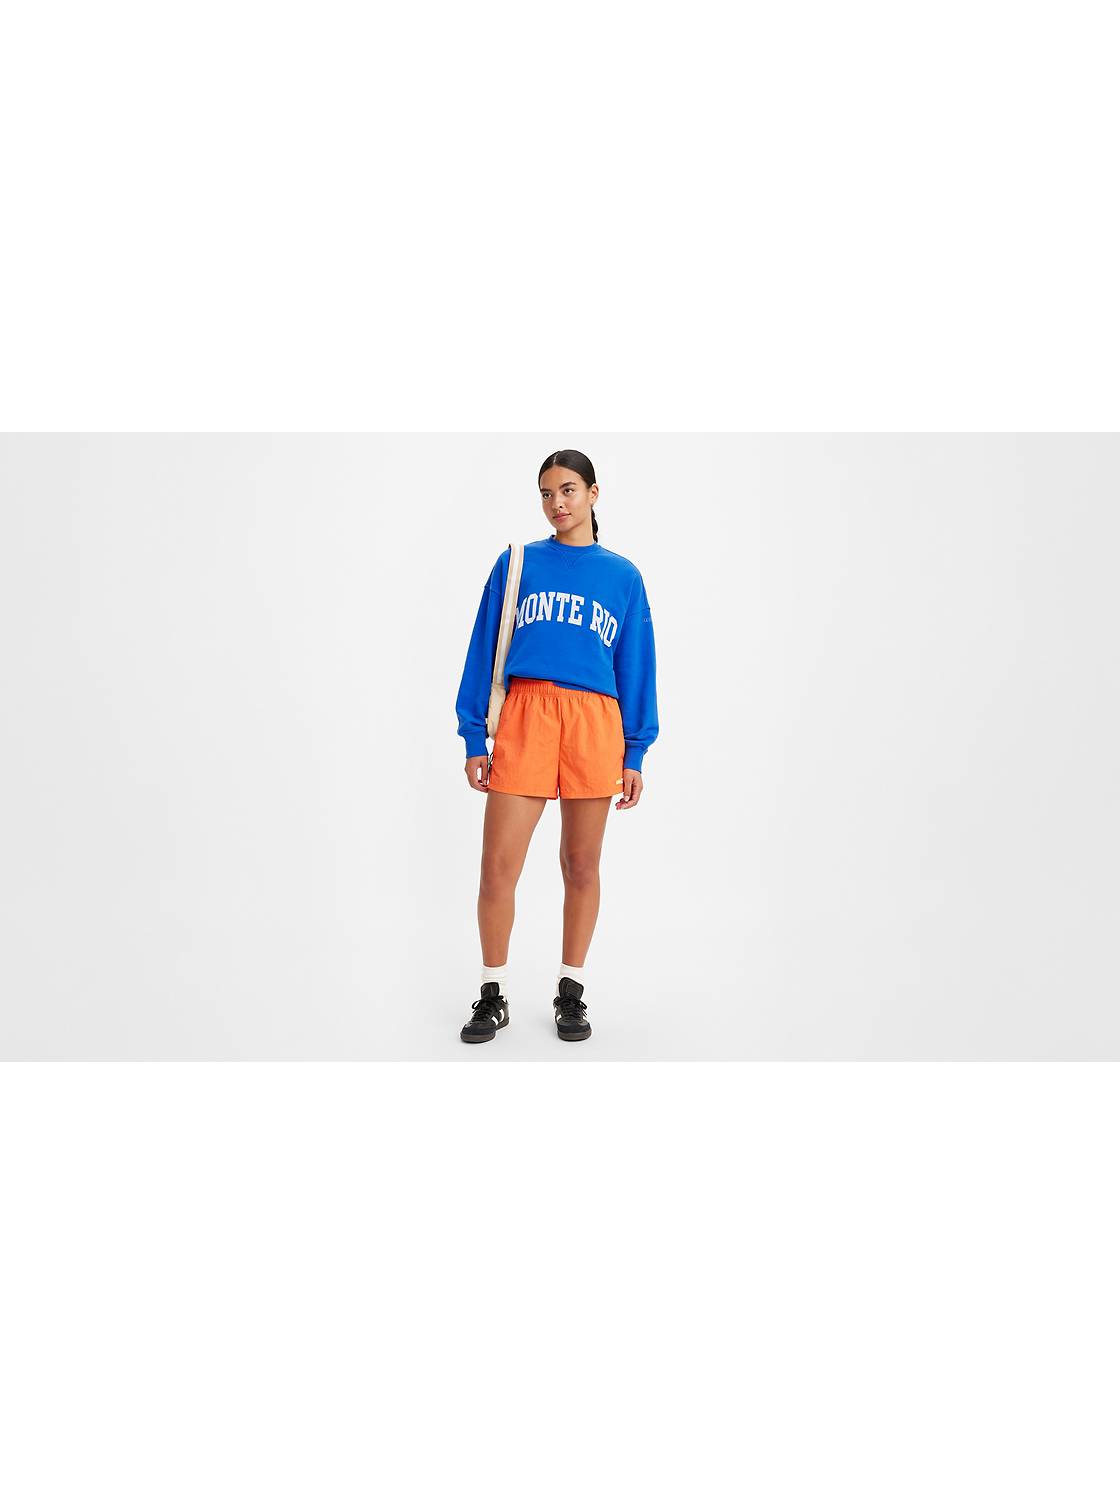 Buy SPECIALMAGIC Sweat Shorts for Women Cotton Shorts with